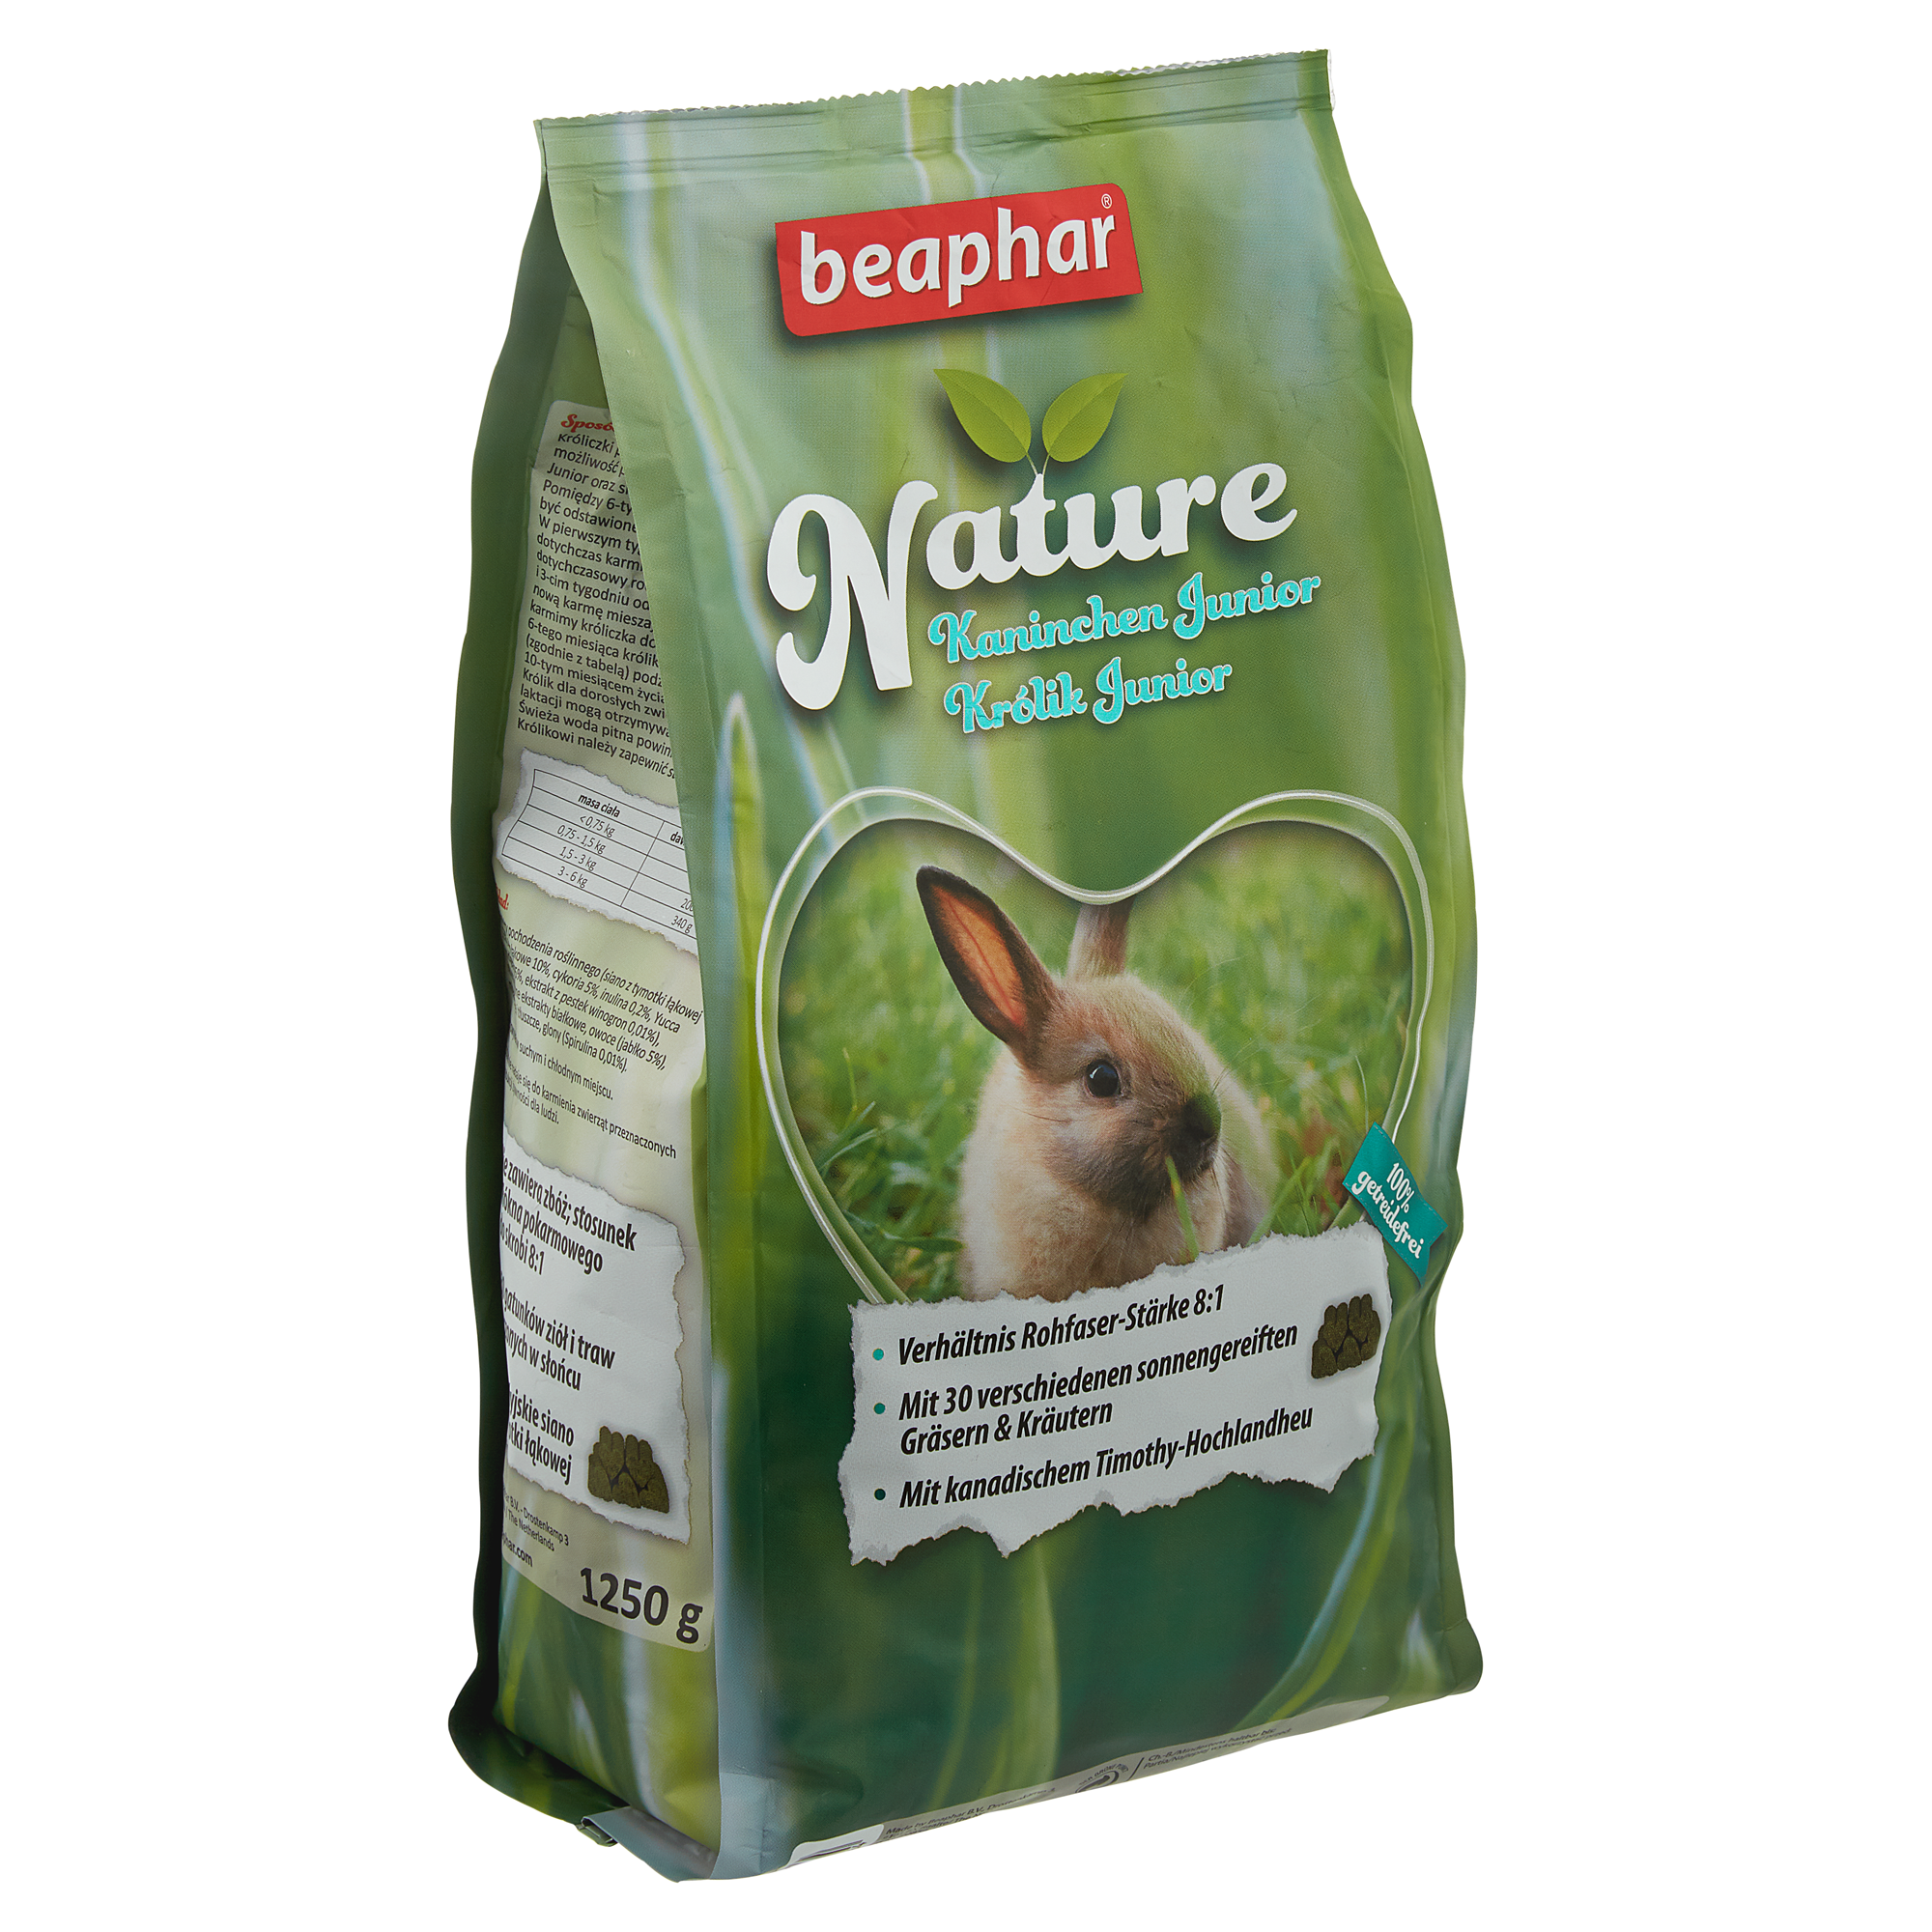 Junior-Kaninchenfutter 'Nature' 1,25 kg + product picture